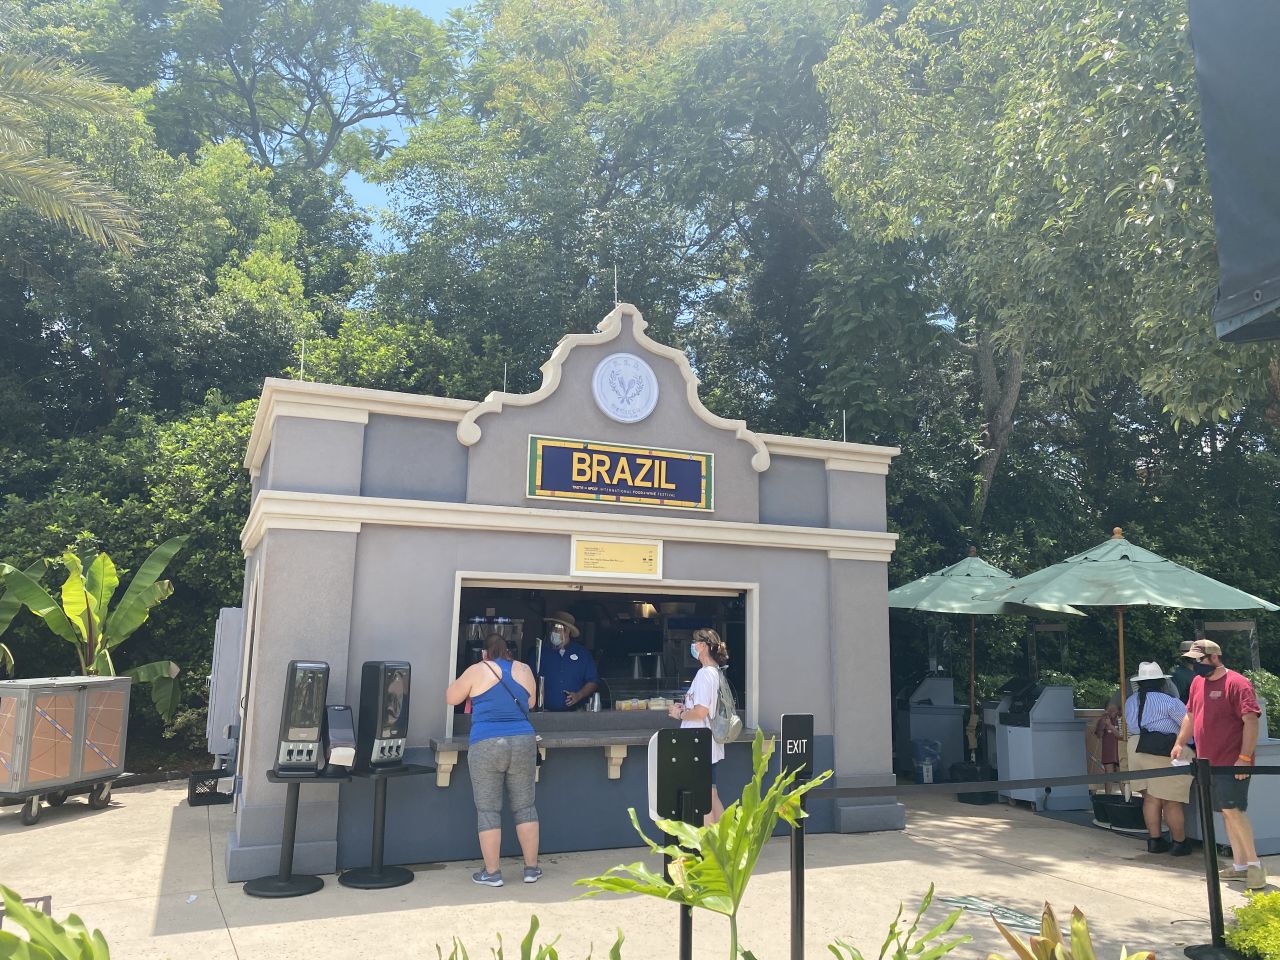 The Epcot International Food & Wine Festival coincides with reopening day. Some 20 pop-up food kiosks are scattered throughout the World Showcase, including locations from Brazil (above), Hawaii, China and Morocco.